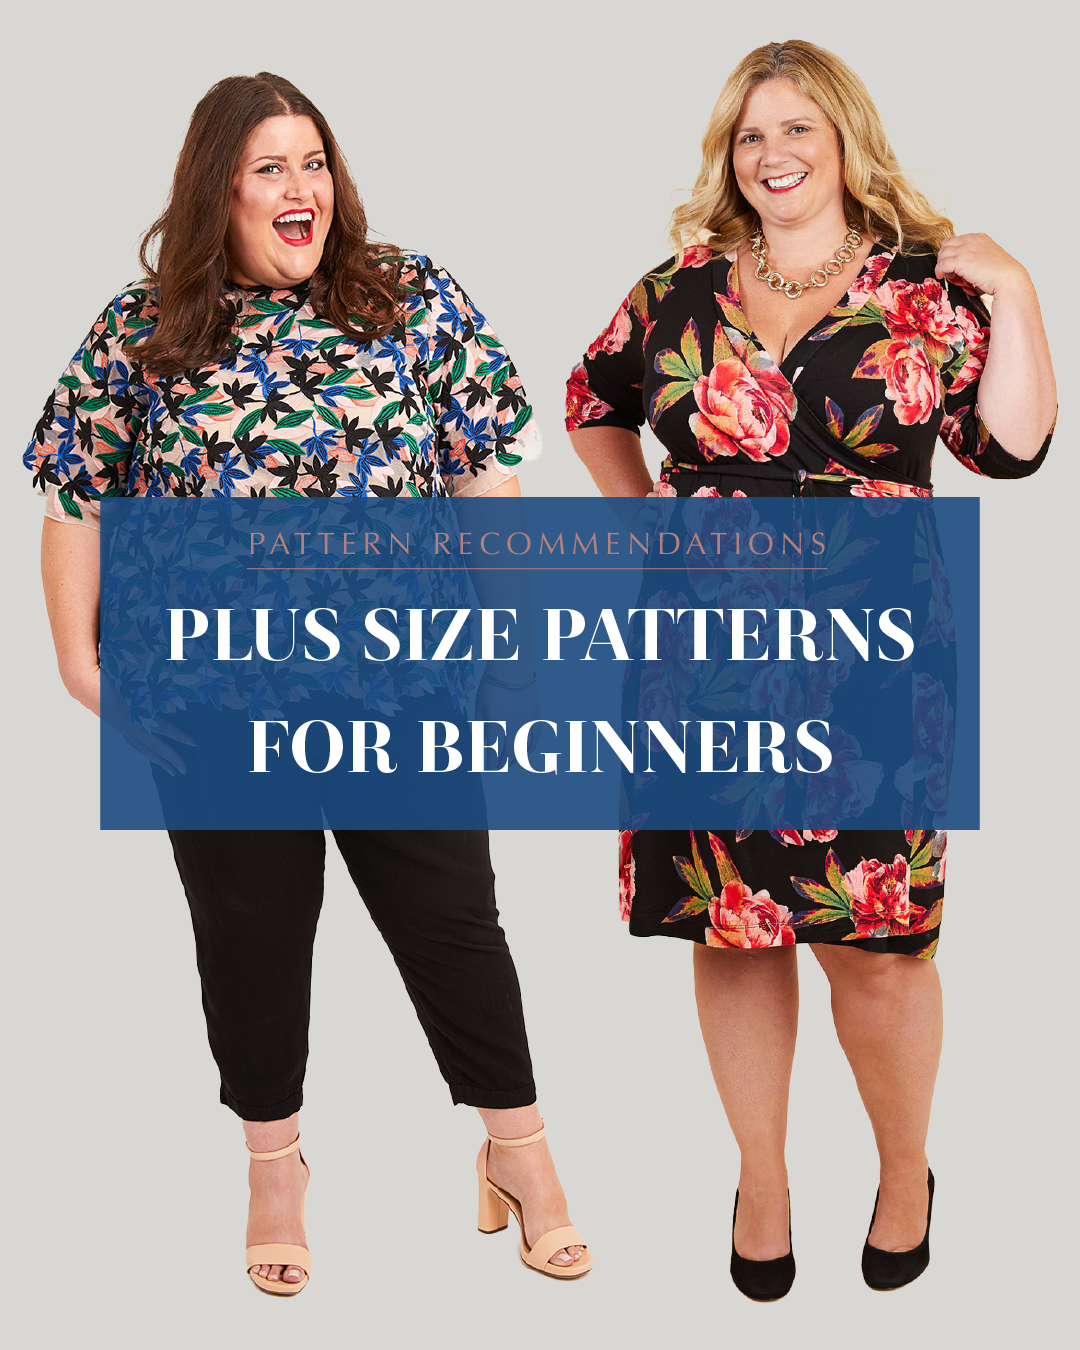 Plus Size Sewing Patterns for Beginners from Cashmerette